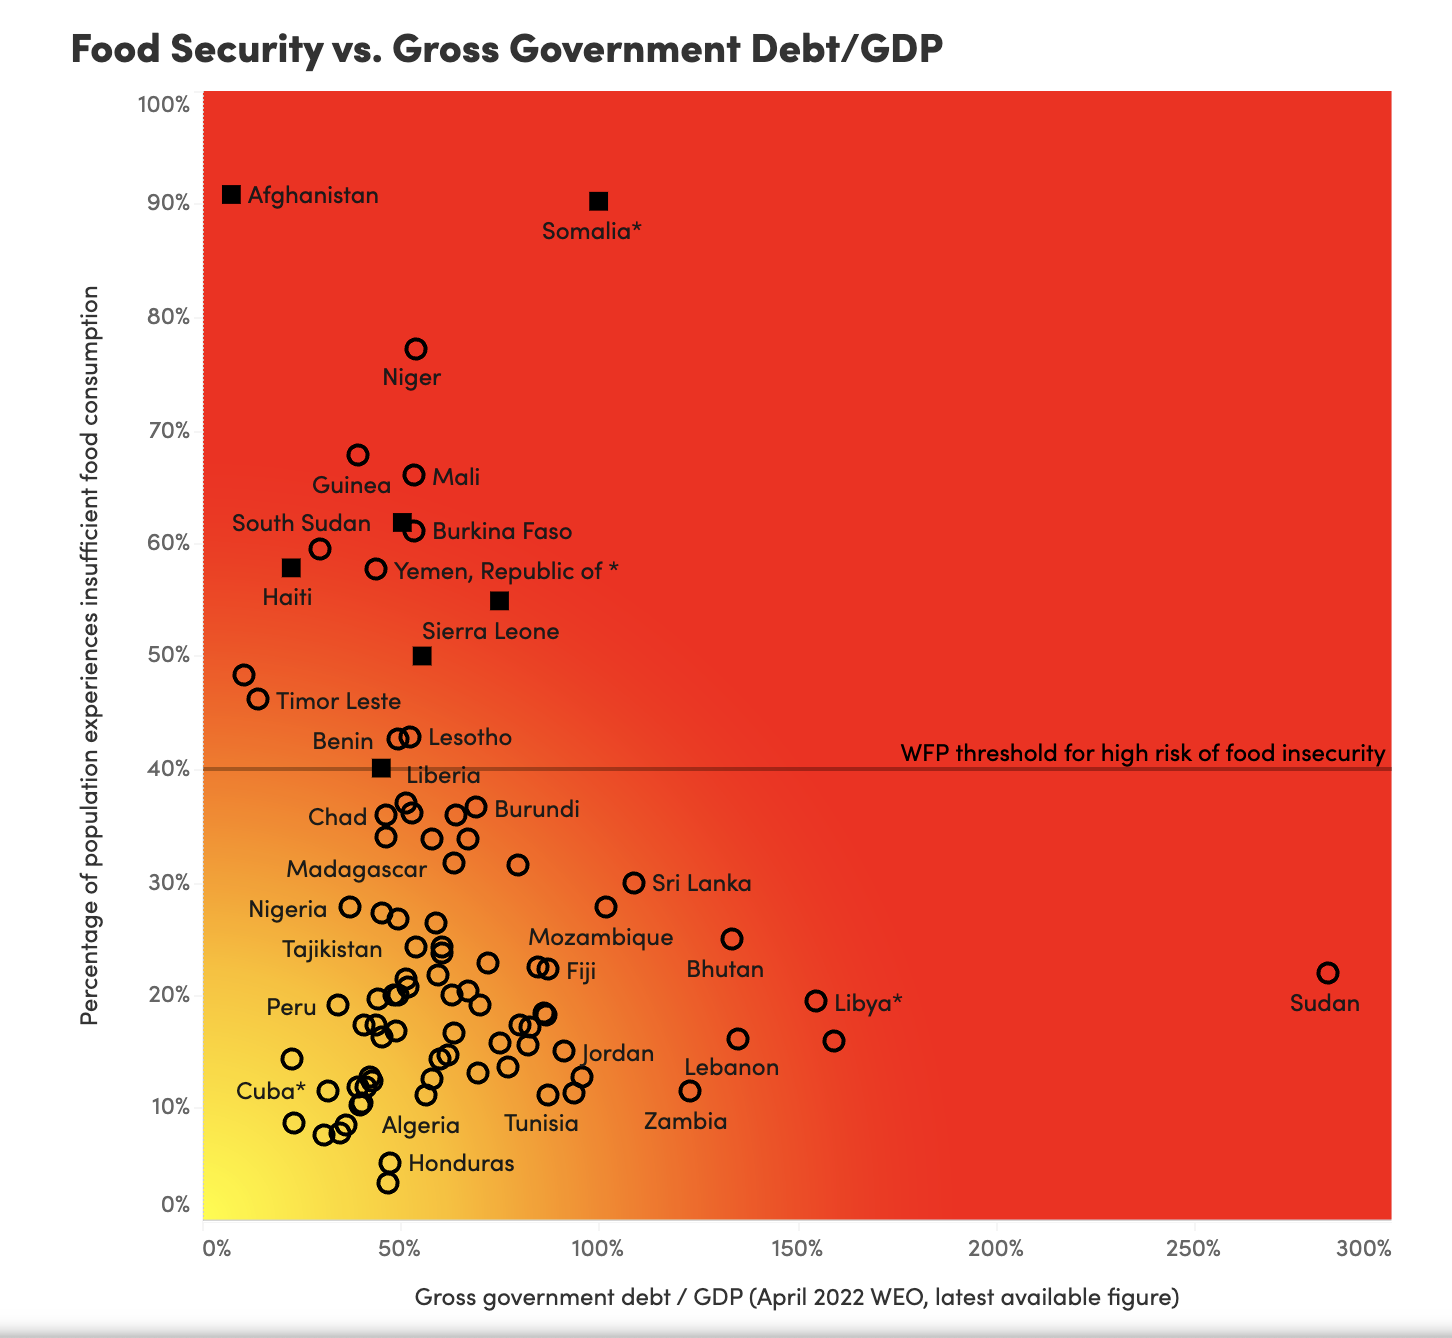 A scatter plot showing a measure of food security compared to the ratio of government debt to GDP